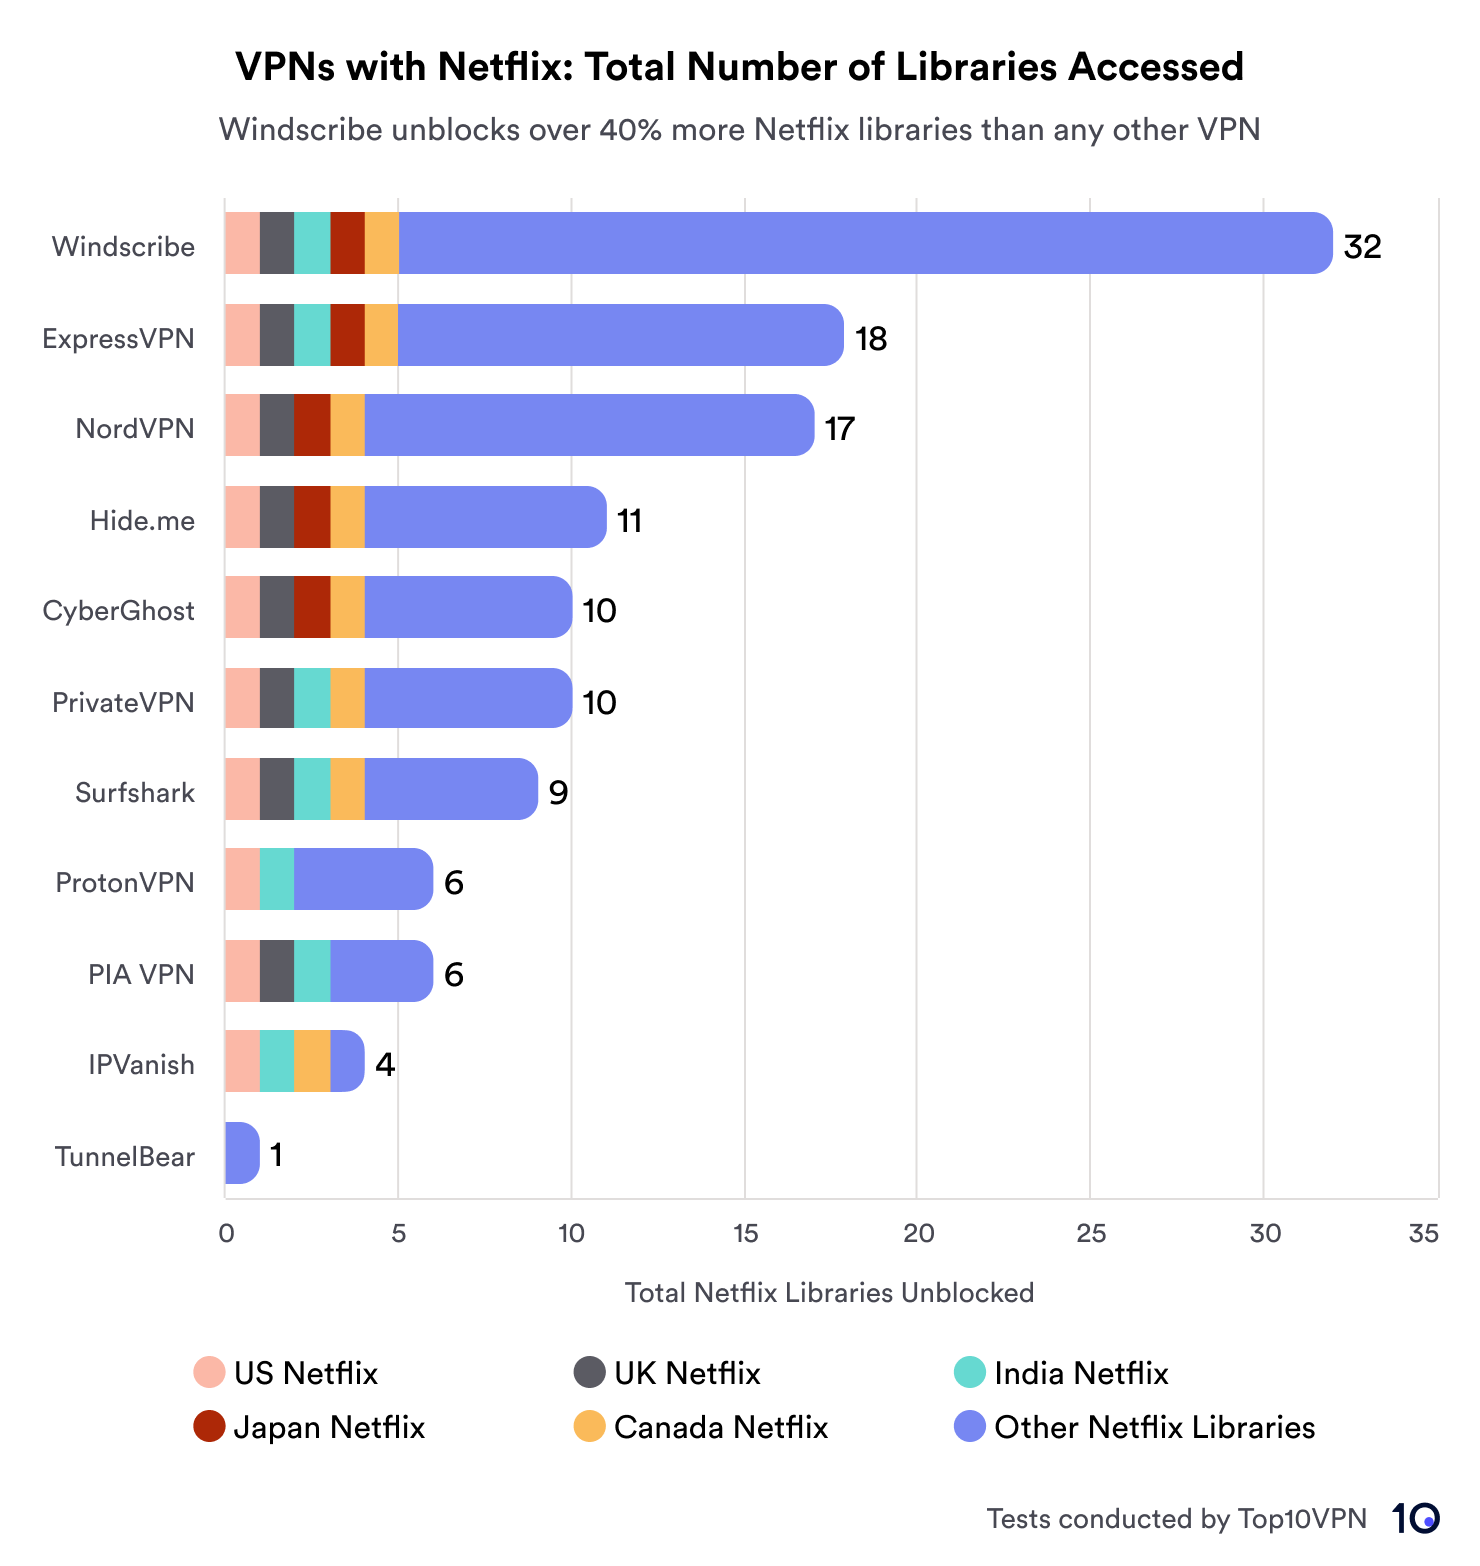 Chart comparing VPNs with Netflix. Windscribe leads with 32 libraries, followed by ExpressVPN and NordVPN.